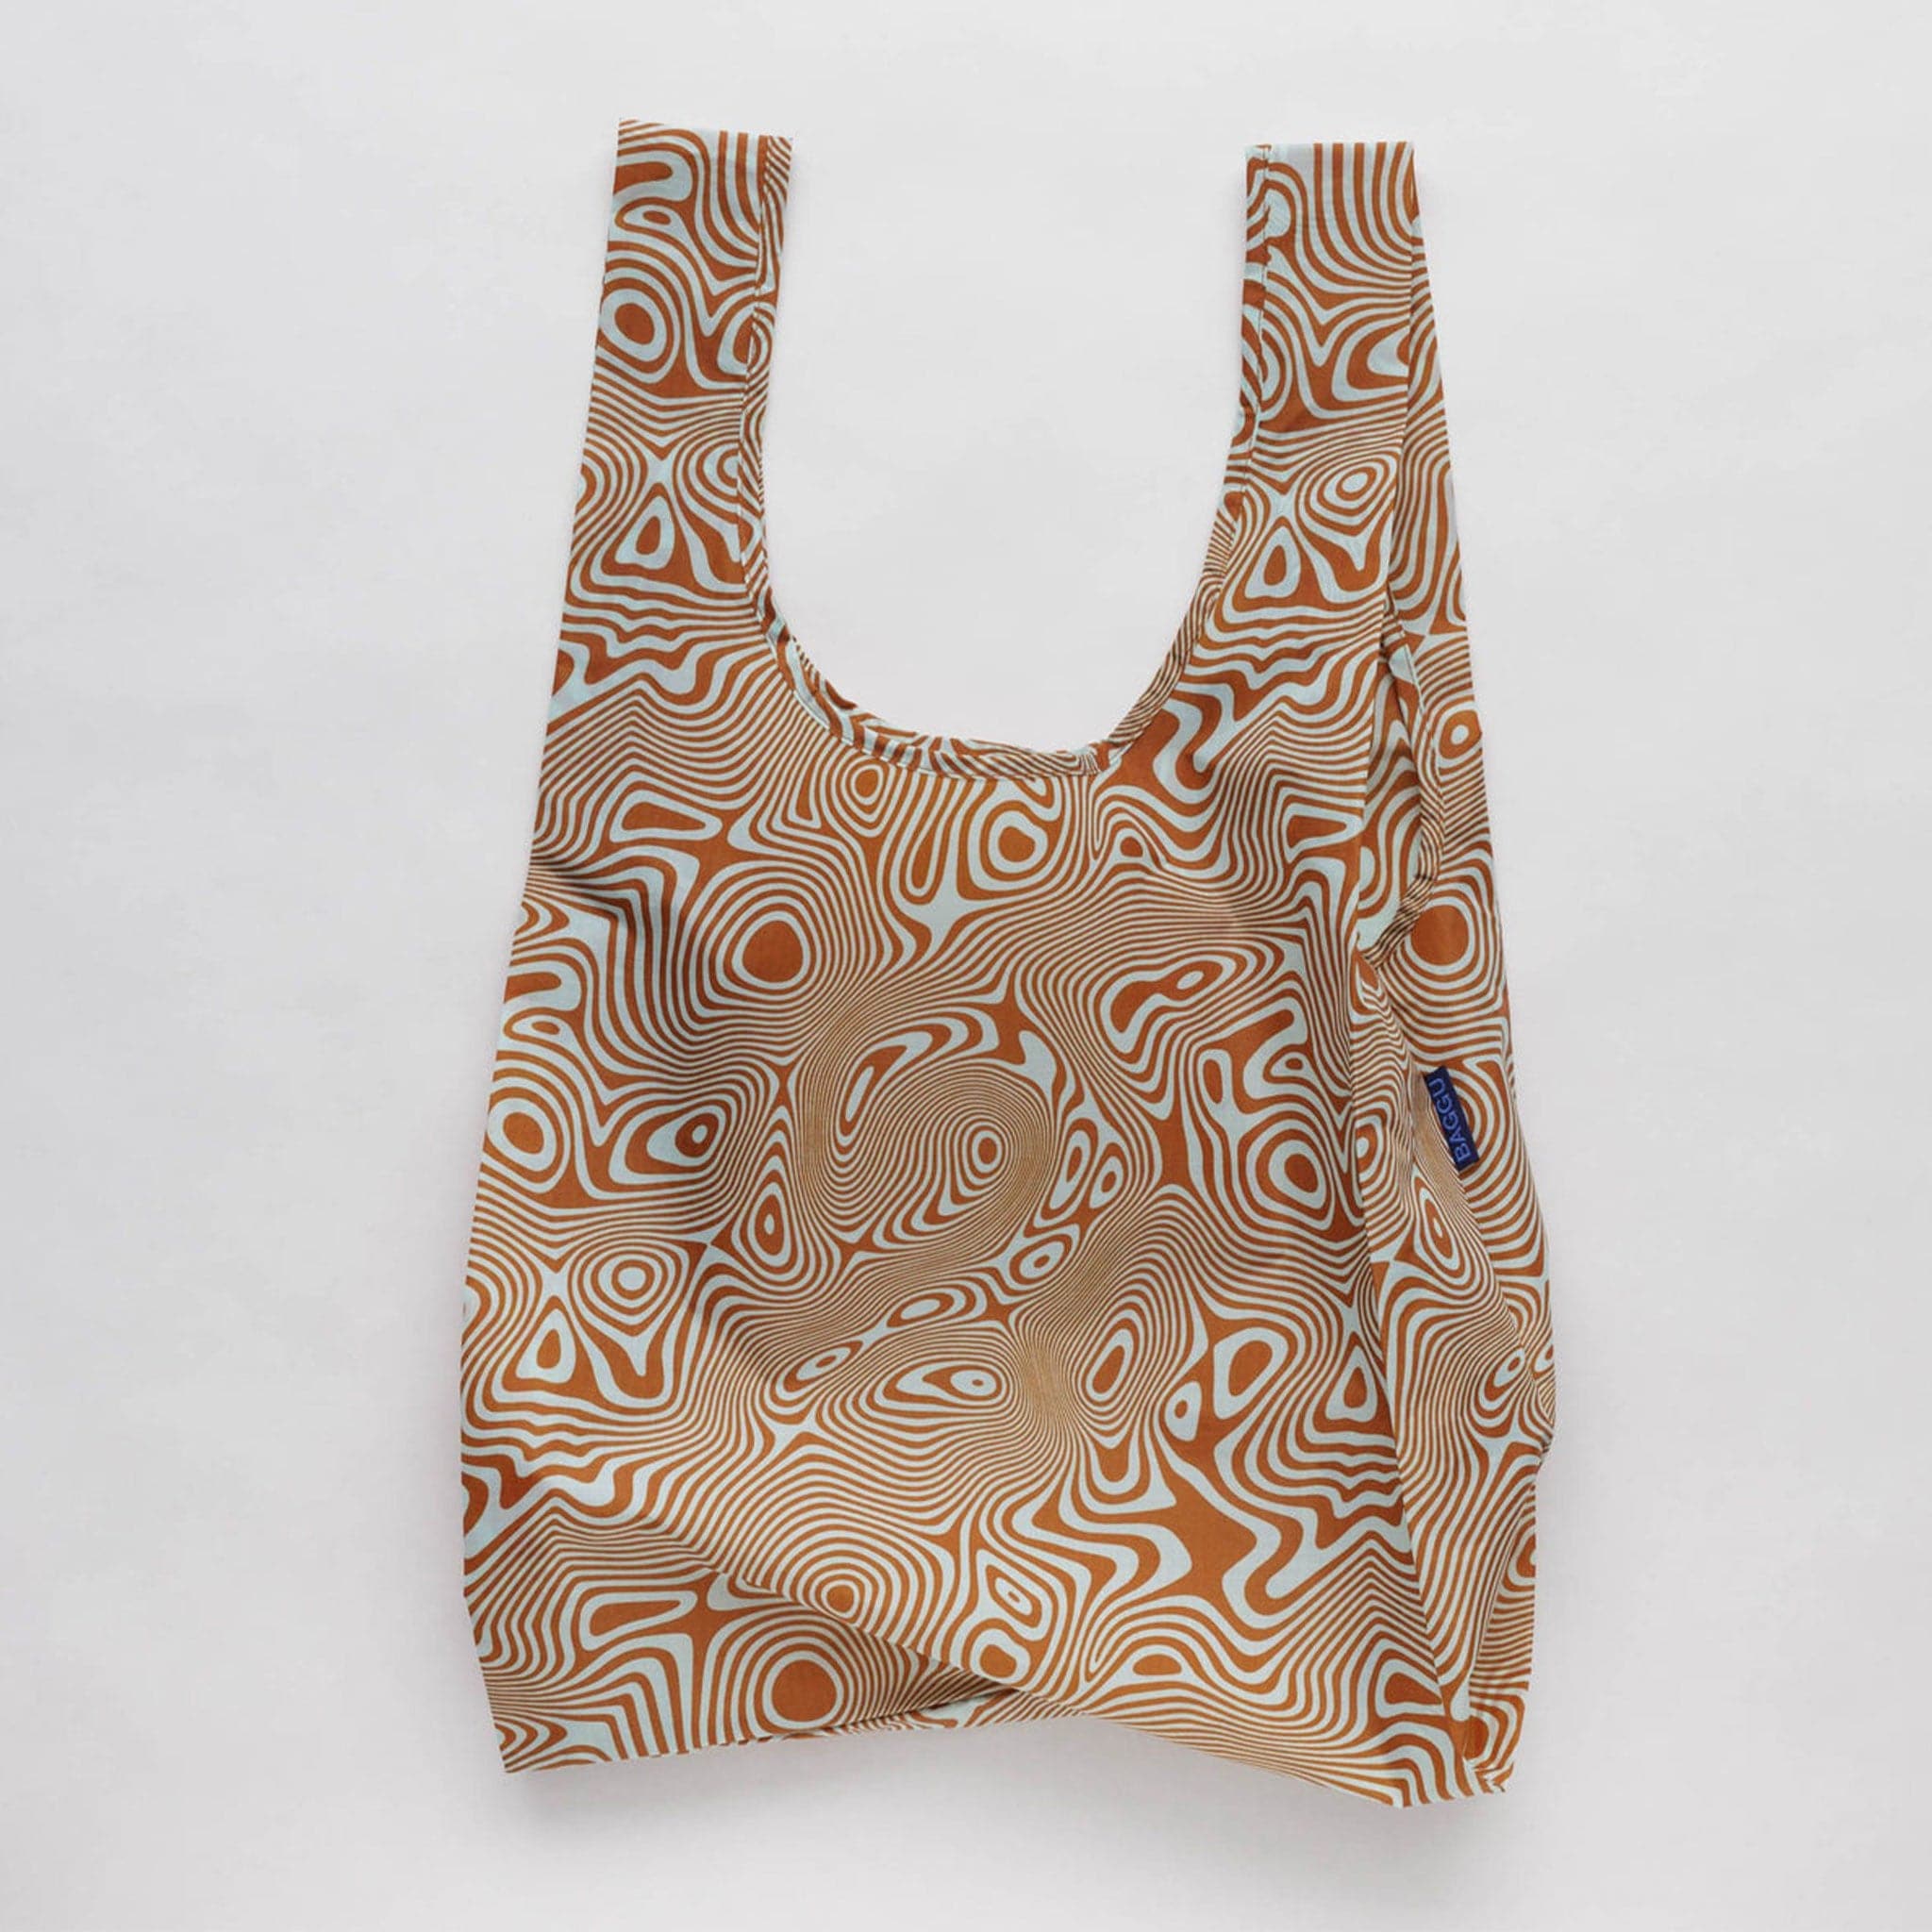 A nylon bag with an orange and cream wavy swirl pattern all over. 